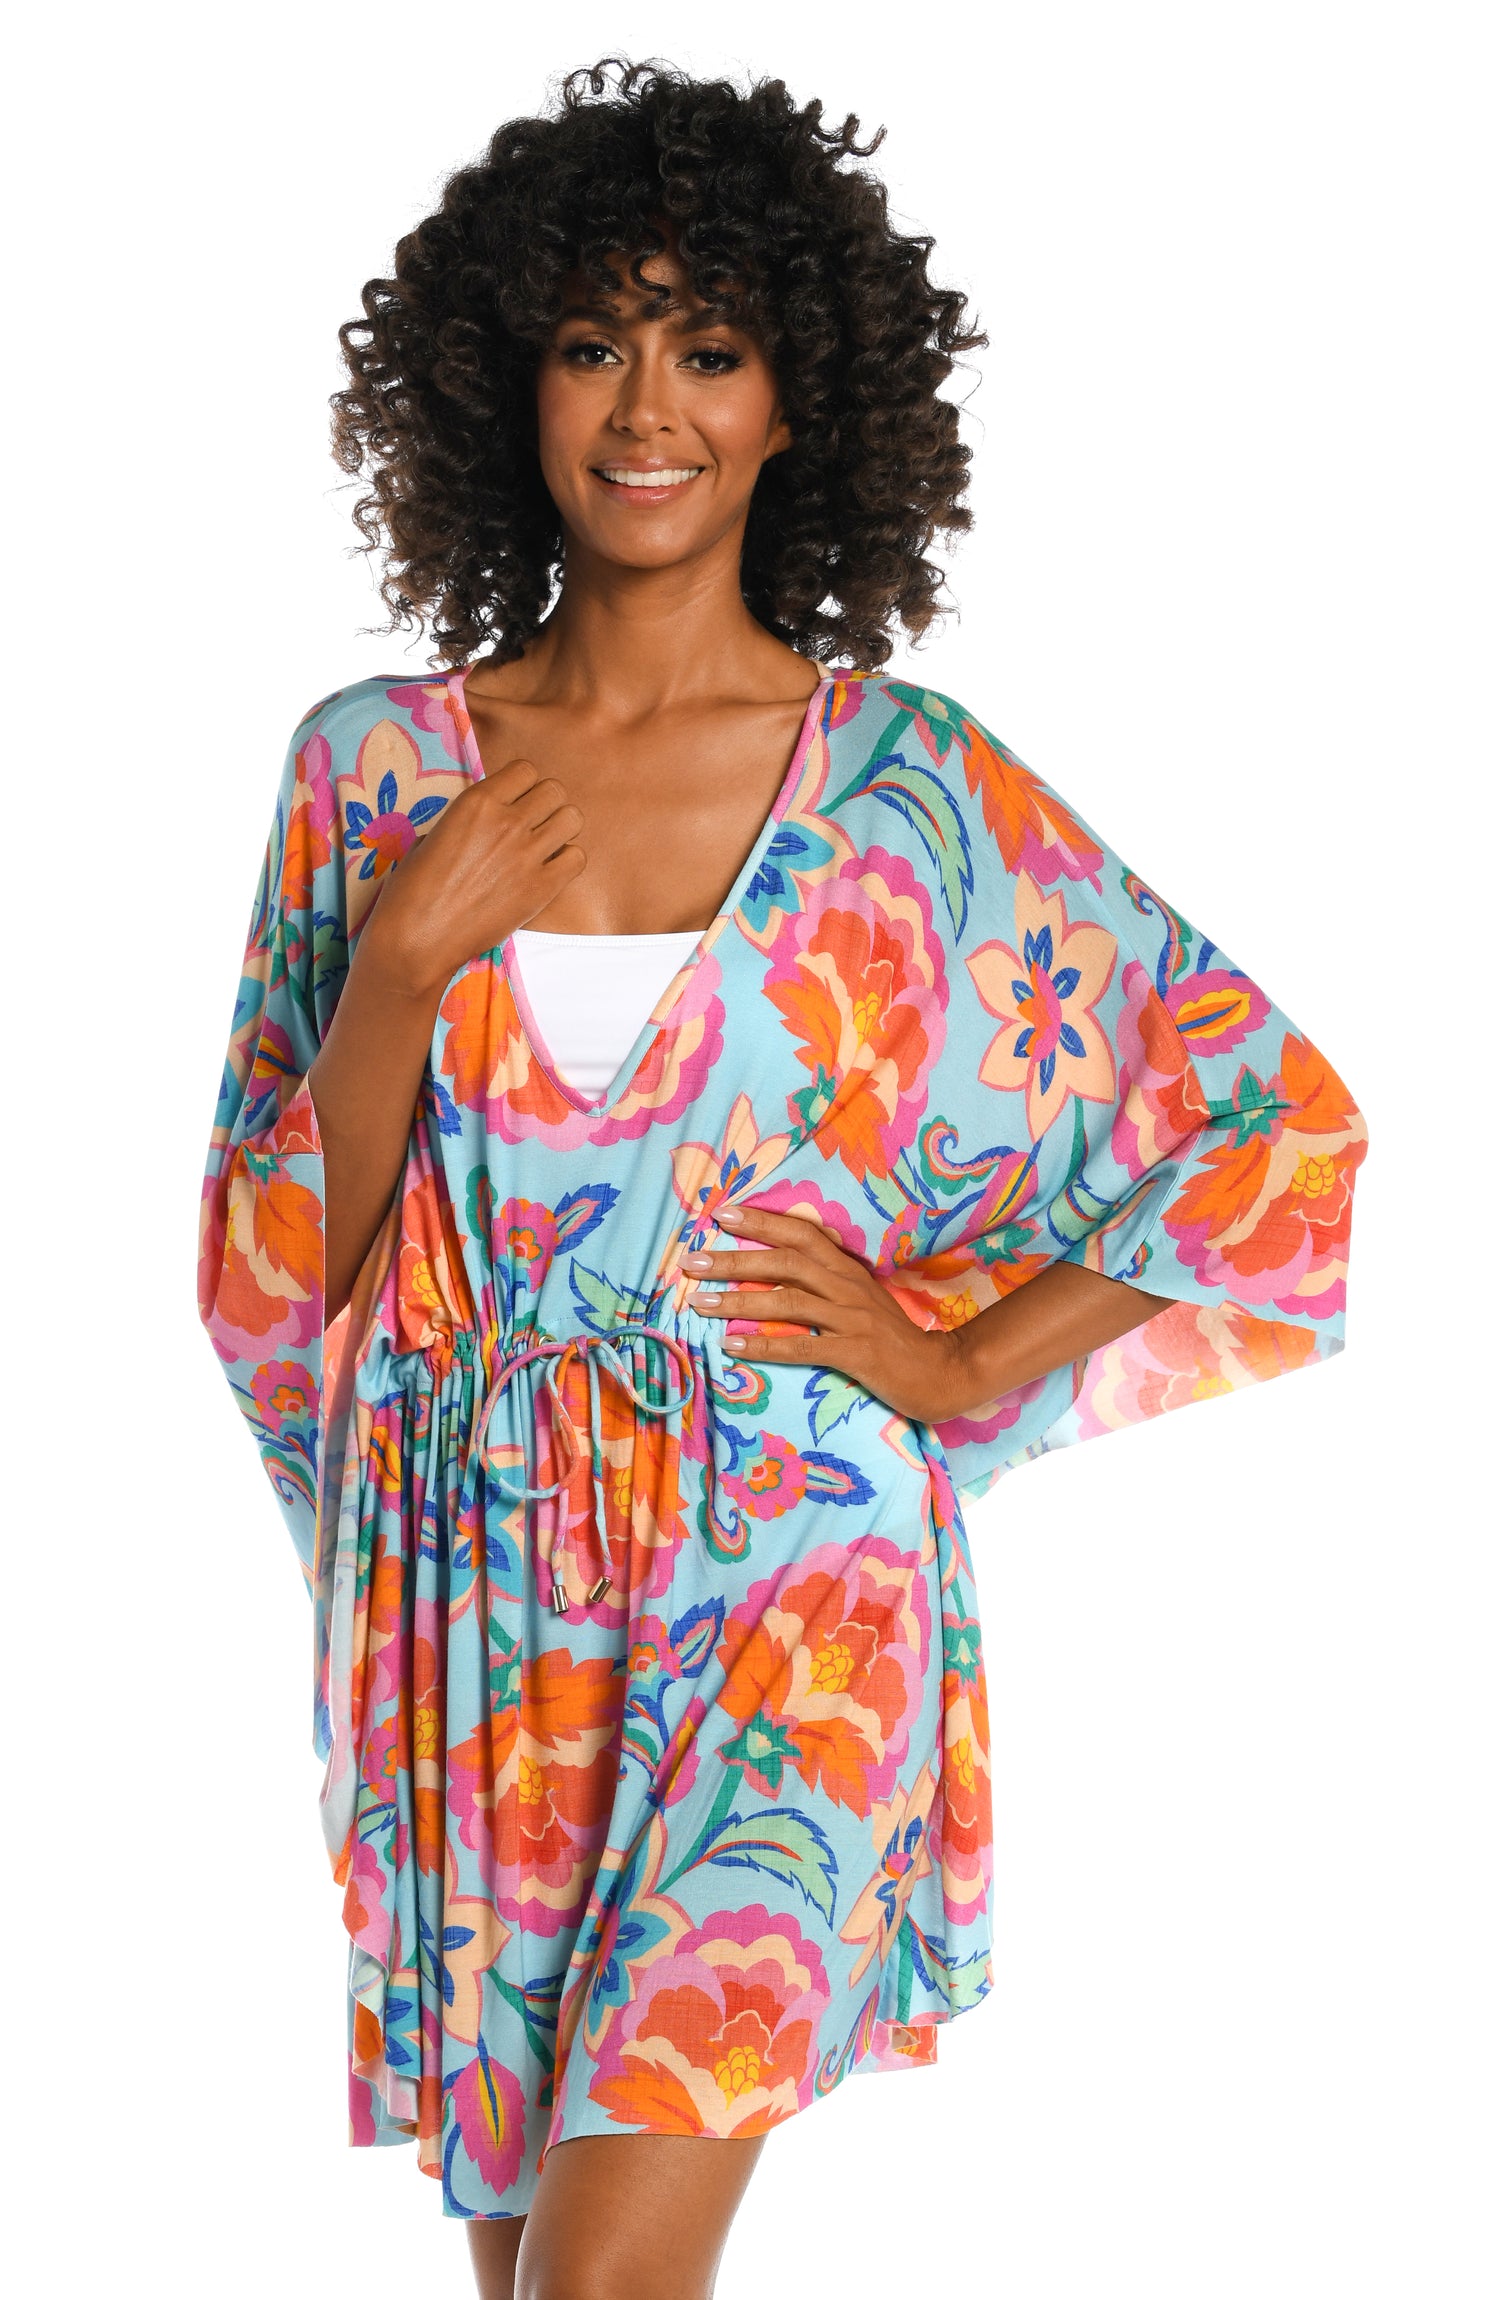 Model is wearing a light blue multi colored tropical printed tunic cover up from our Breezy Beauty collection!